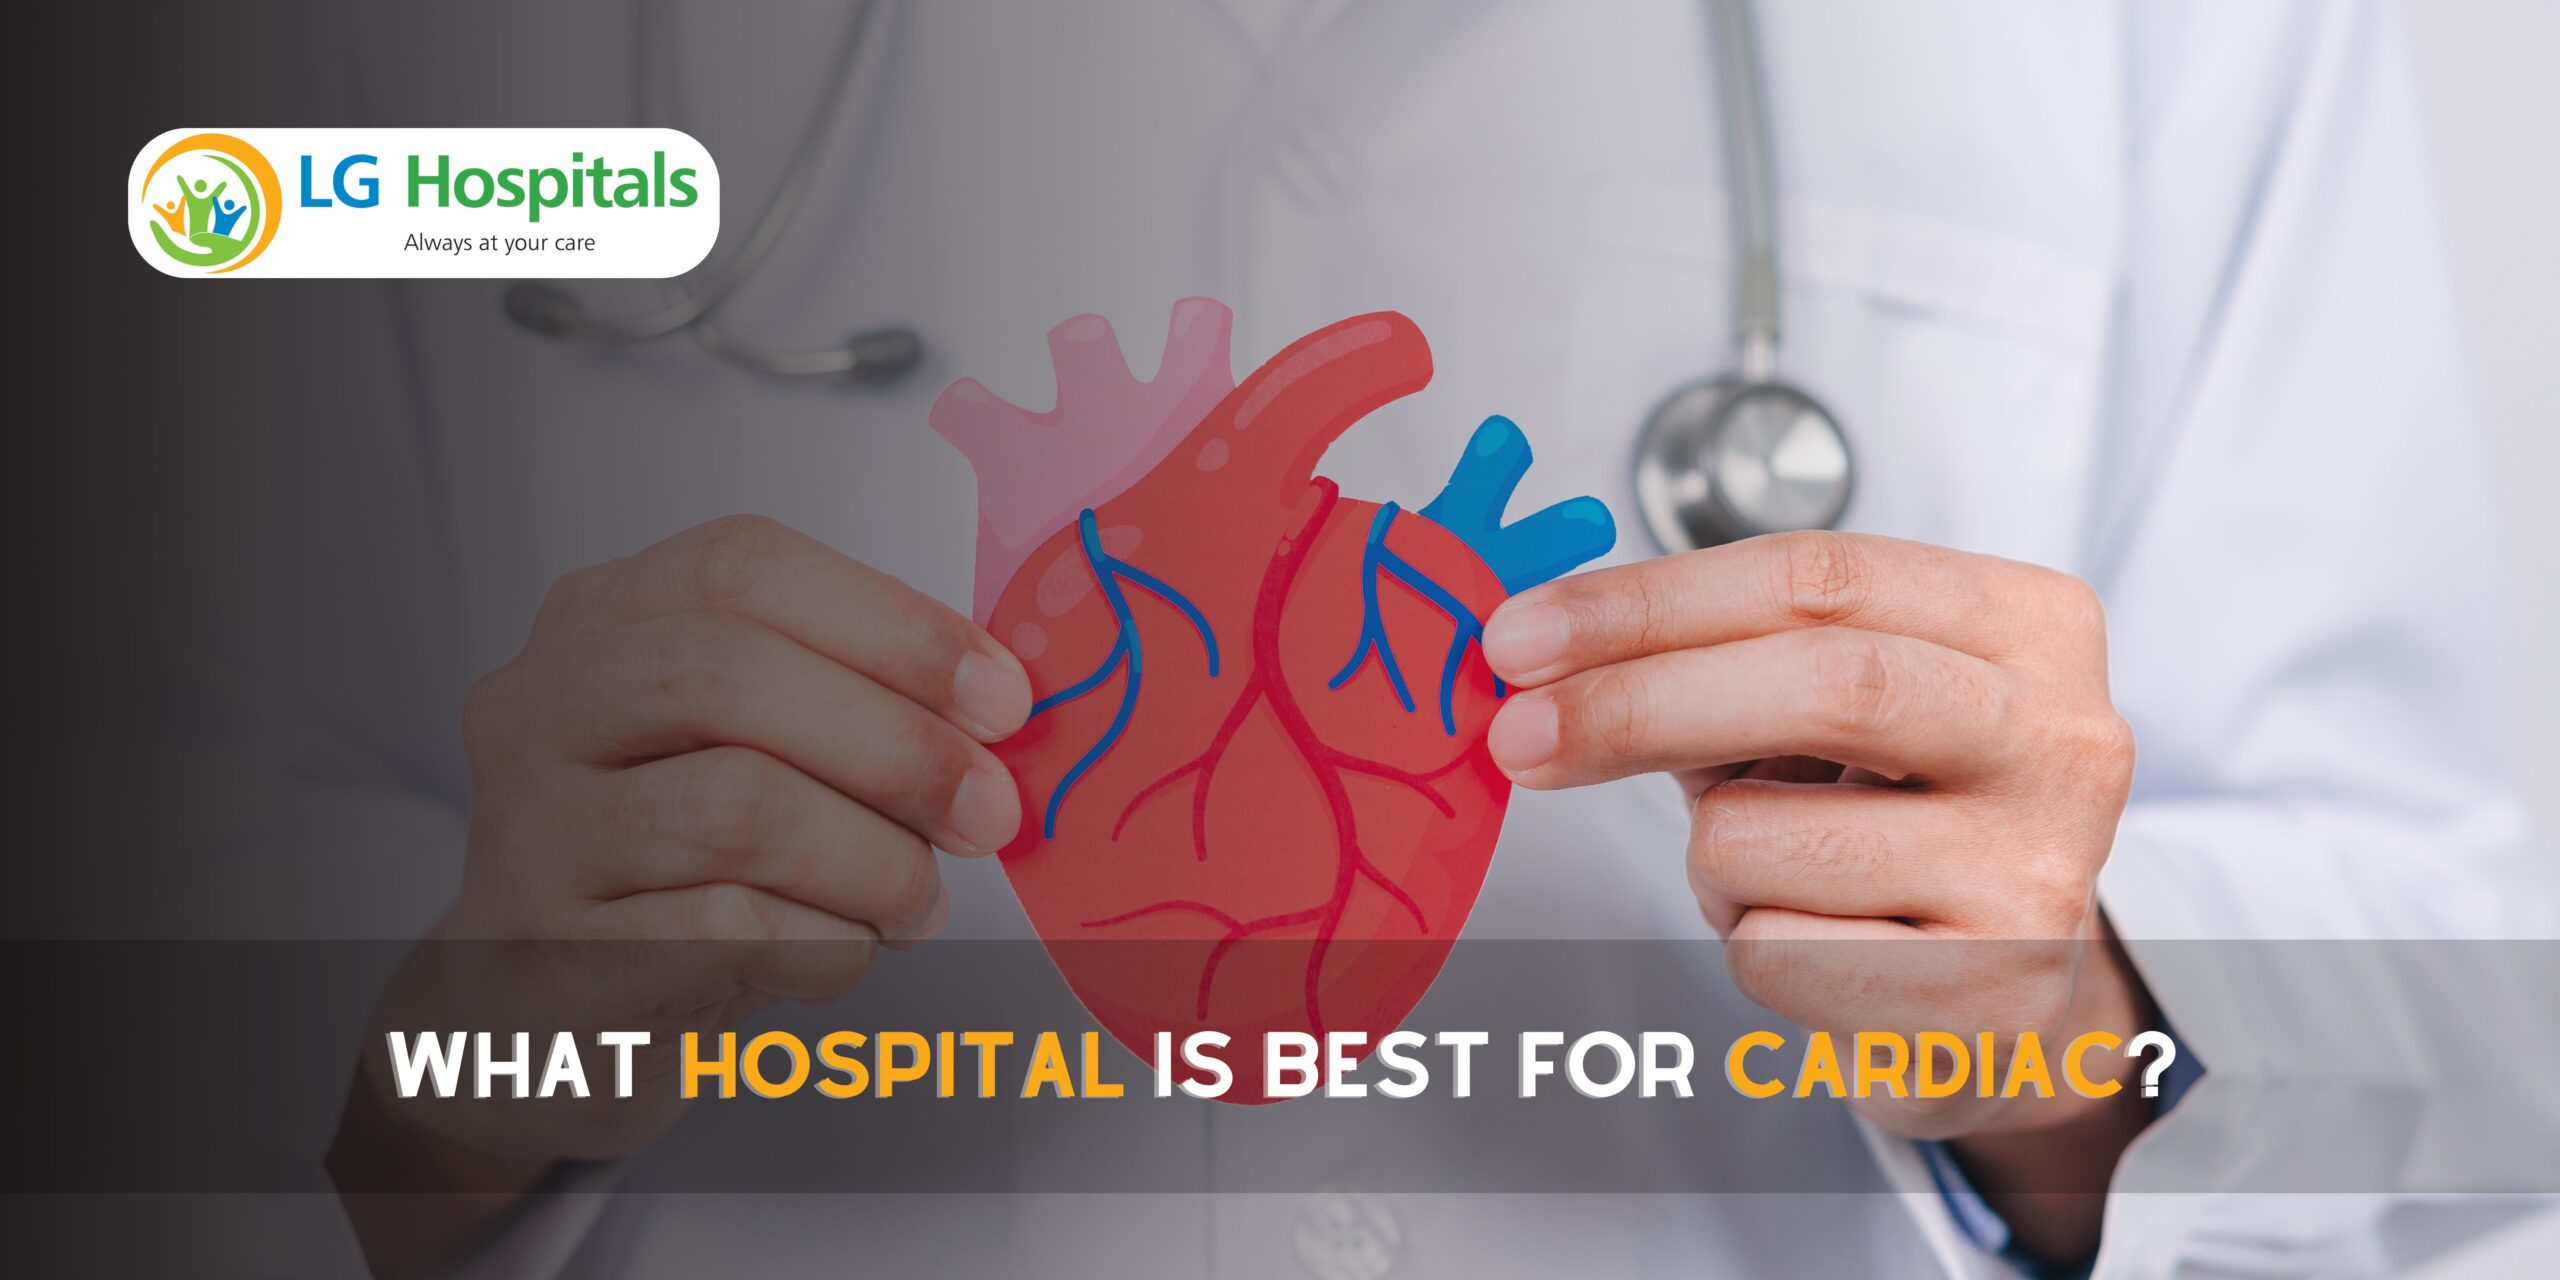 What Hospital Is Best for Cardiac?